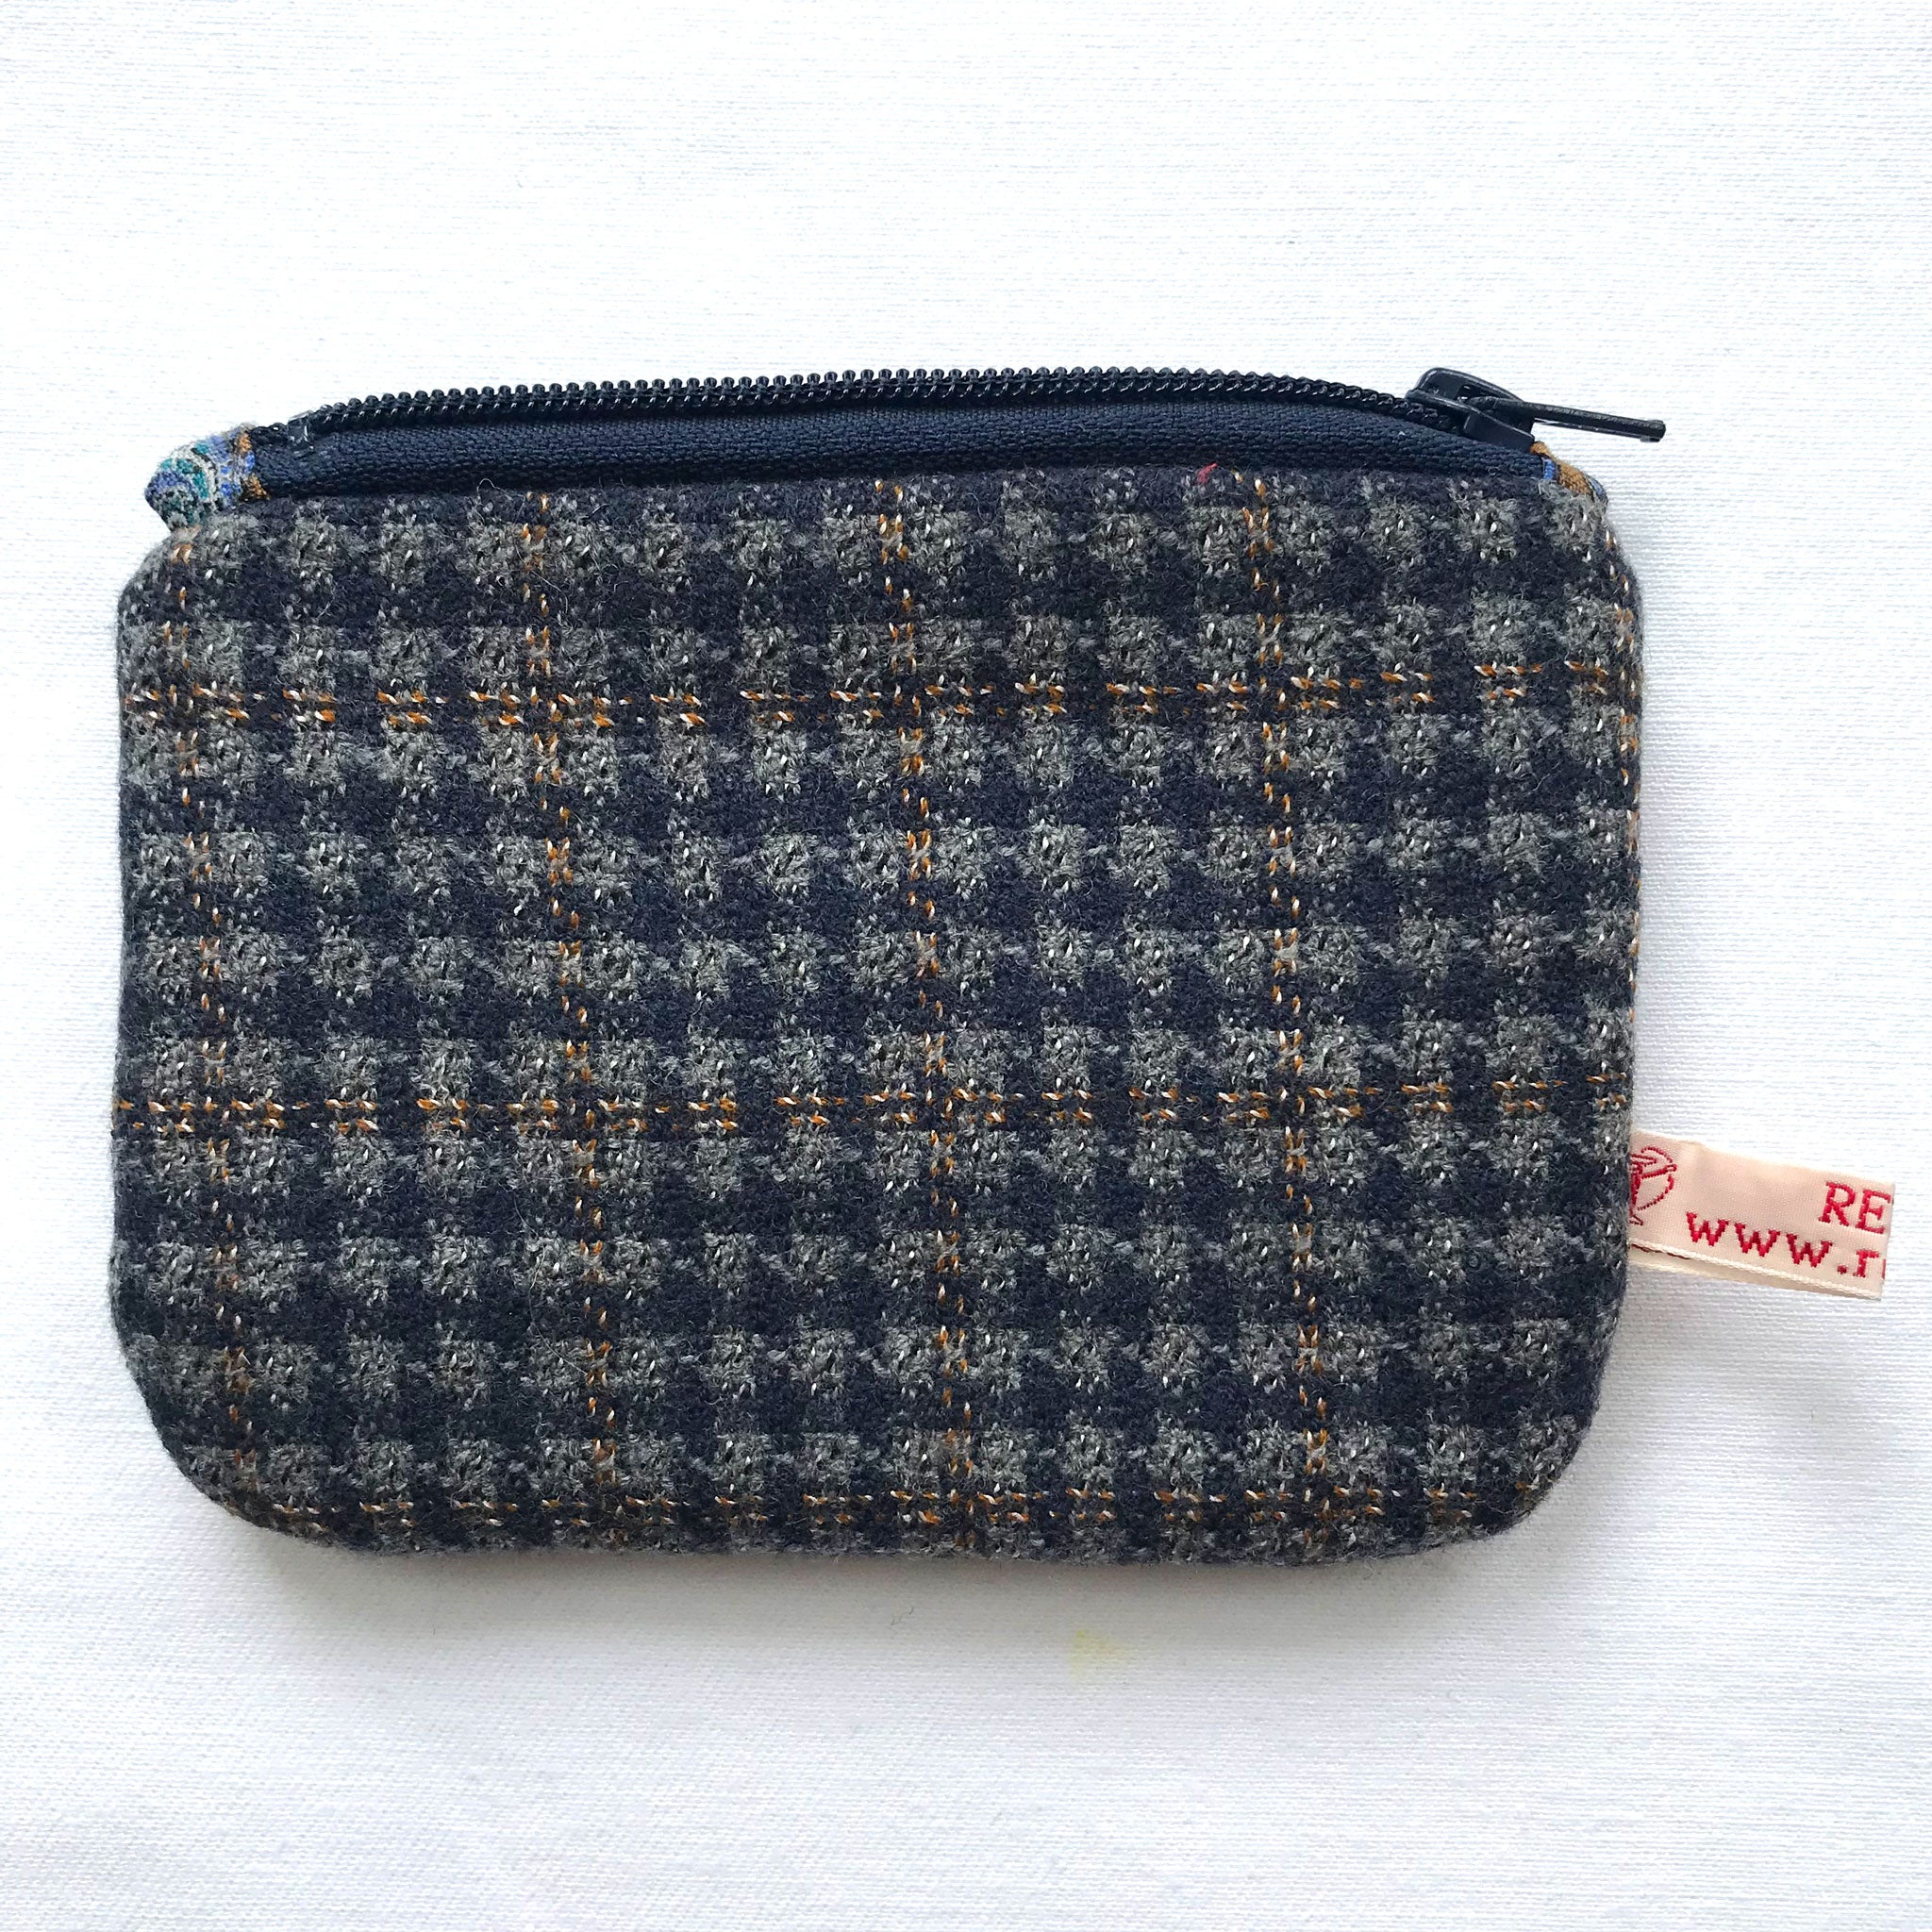 Close up of blue and grey tweed purse with navy zip. ReTweed label is visible